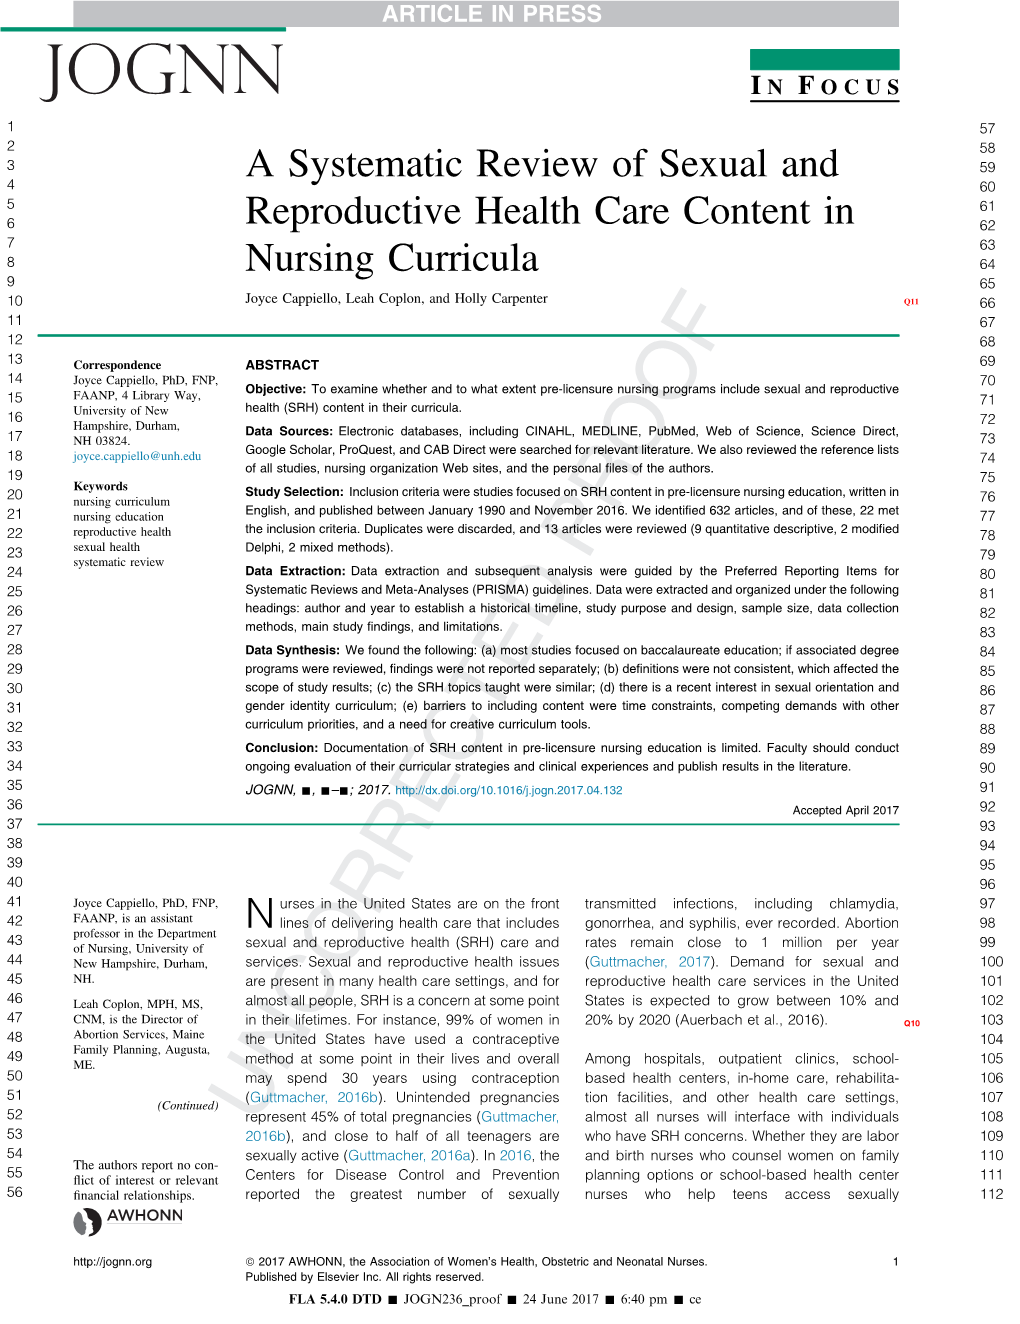 Systematic Review of Sexual and Reproductive Health Care Content